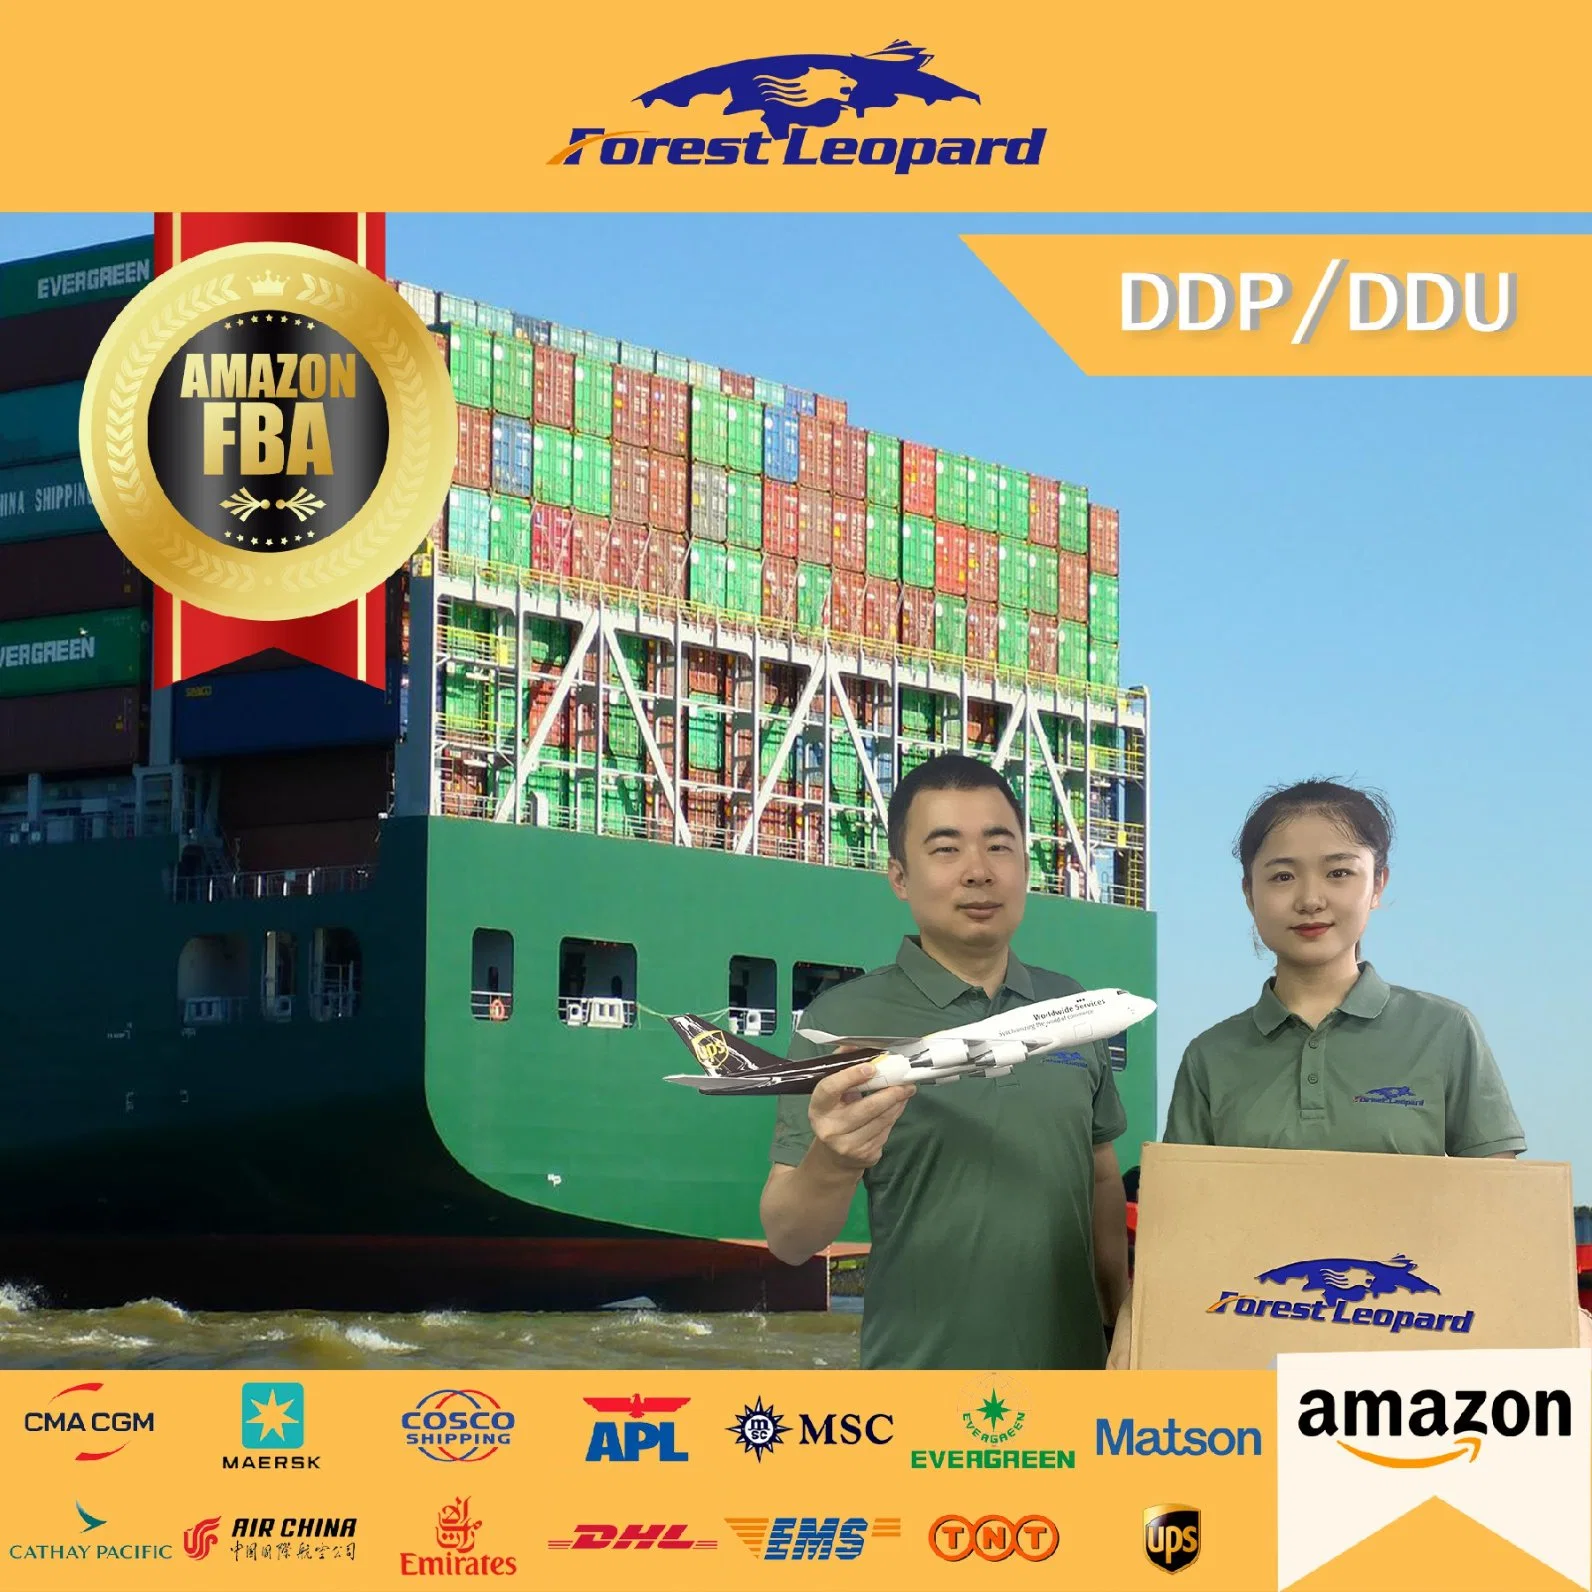 Top 10 Best Selling Products Railway Train Sea Shipping Air Express Courier DHL UPS FedEx TNT EMS From Shanghai to Transglobal